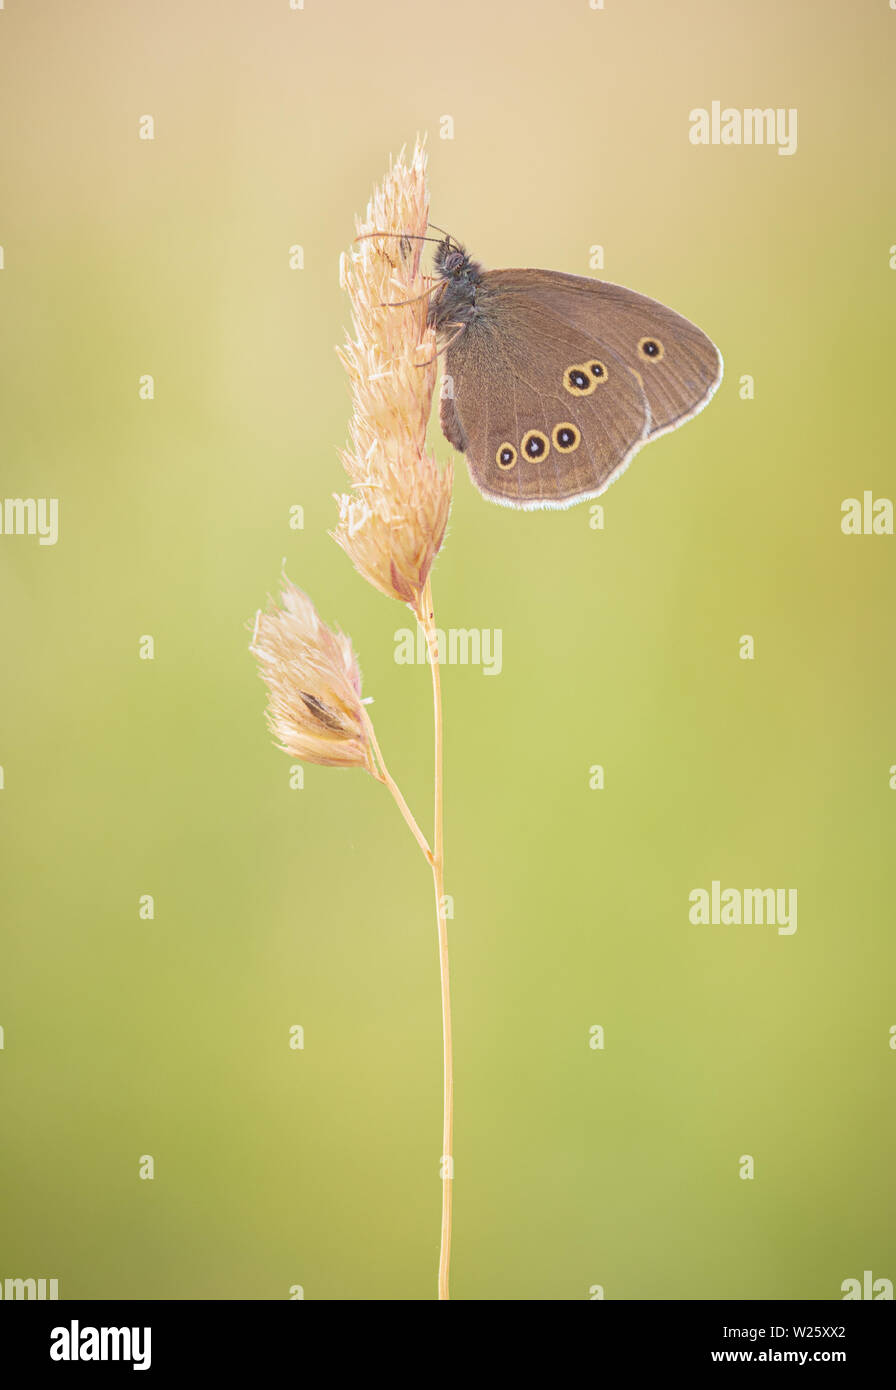 Ringlet Butterfly perched on a grass seed head in an english wildflower meadow on a summer's morning. Yellow wing spots on display. Minimalist image. Stock Photo